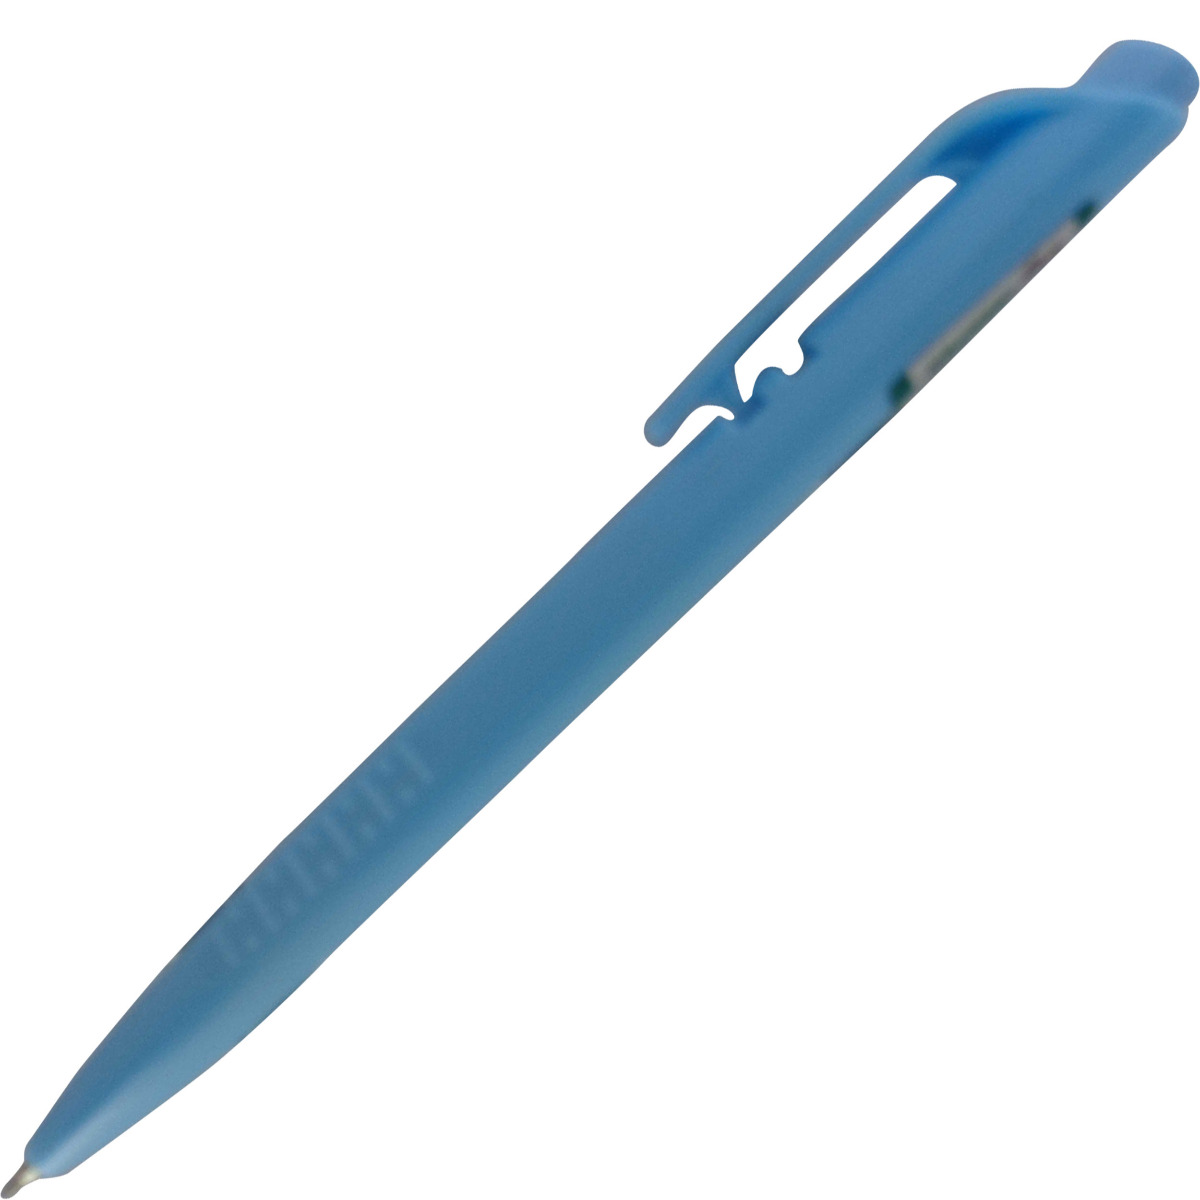 Hauser Billi Model: 13626 Sky Blue color body with Blue ink fine Tip rectractable ball pen